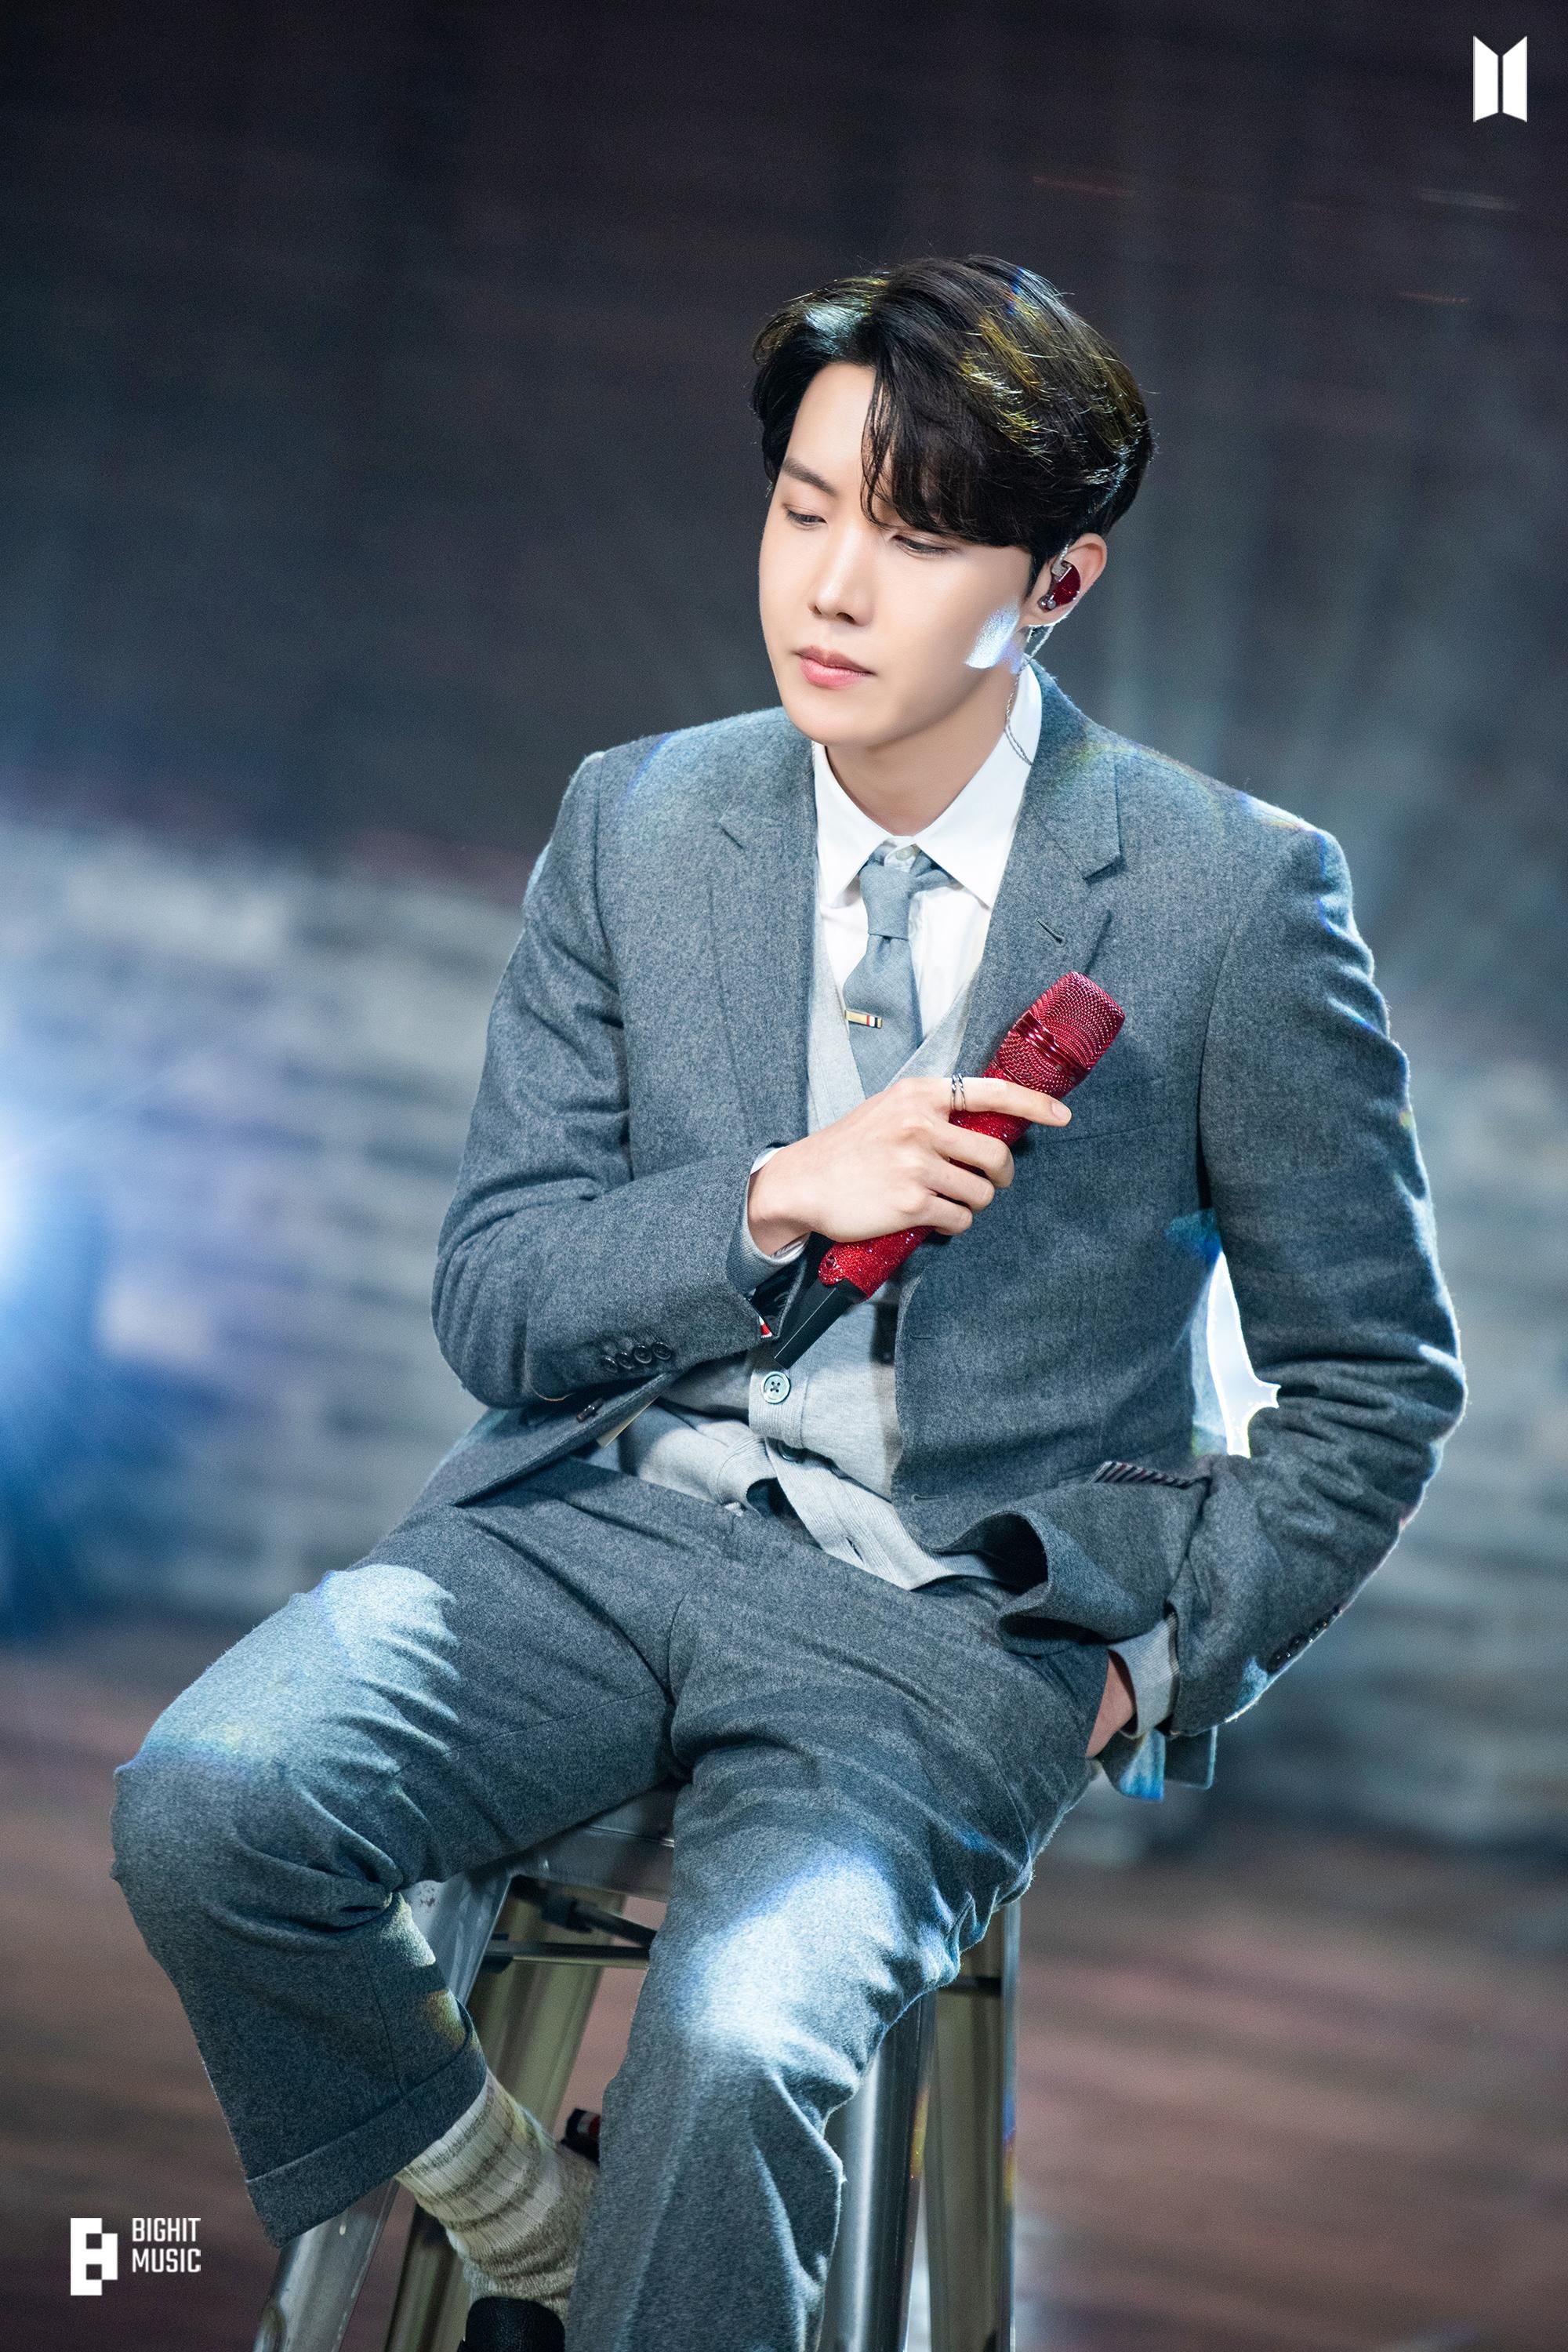 J-Hope photoshoot  Happiness To Be Had